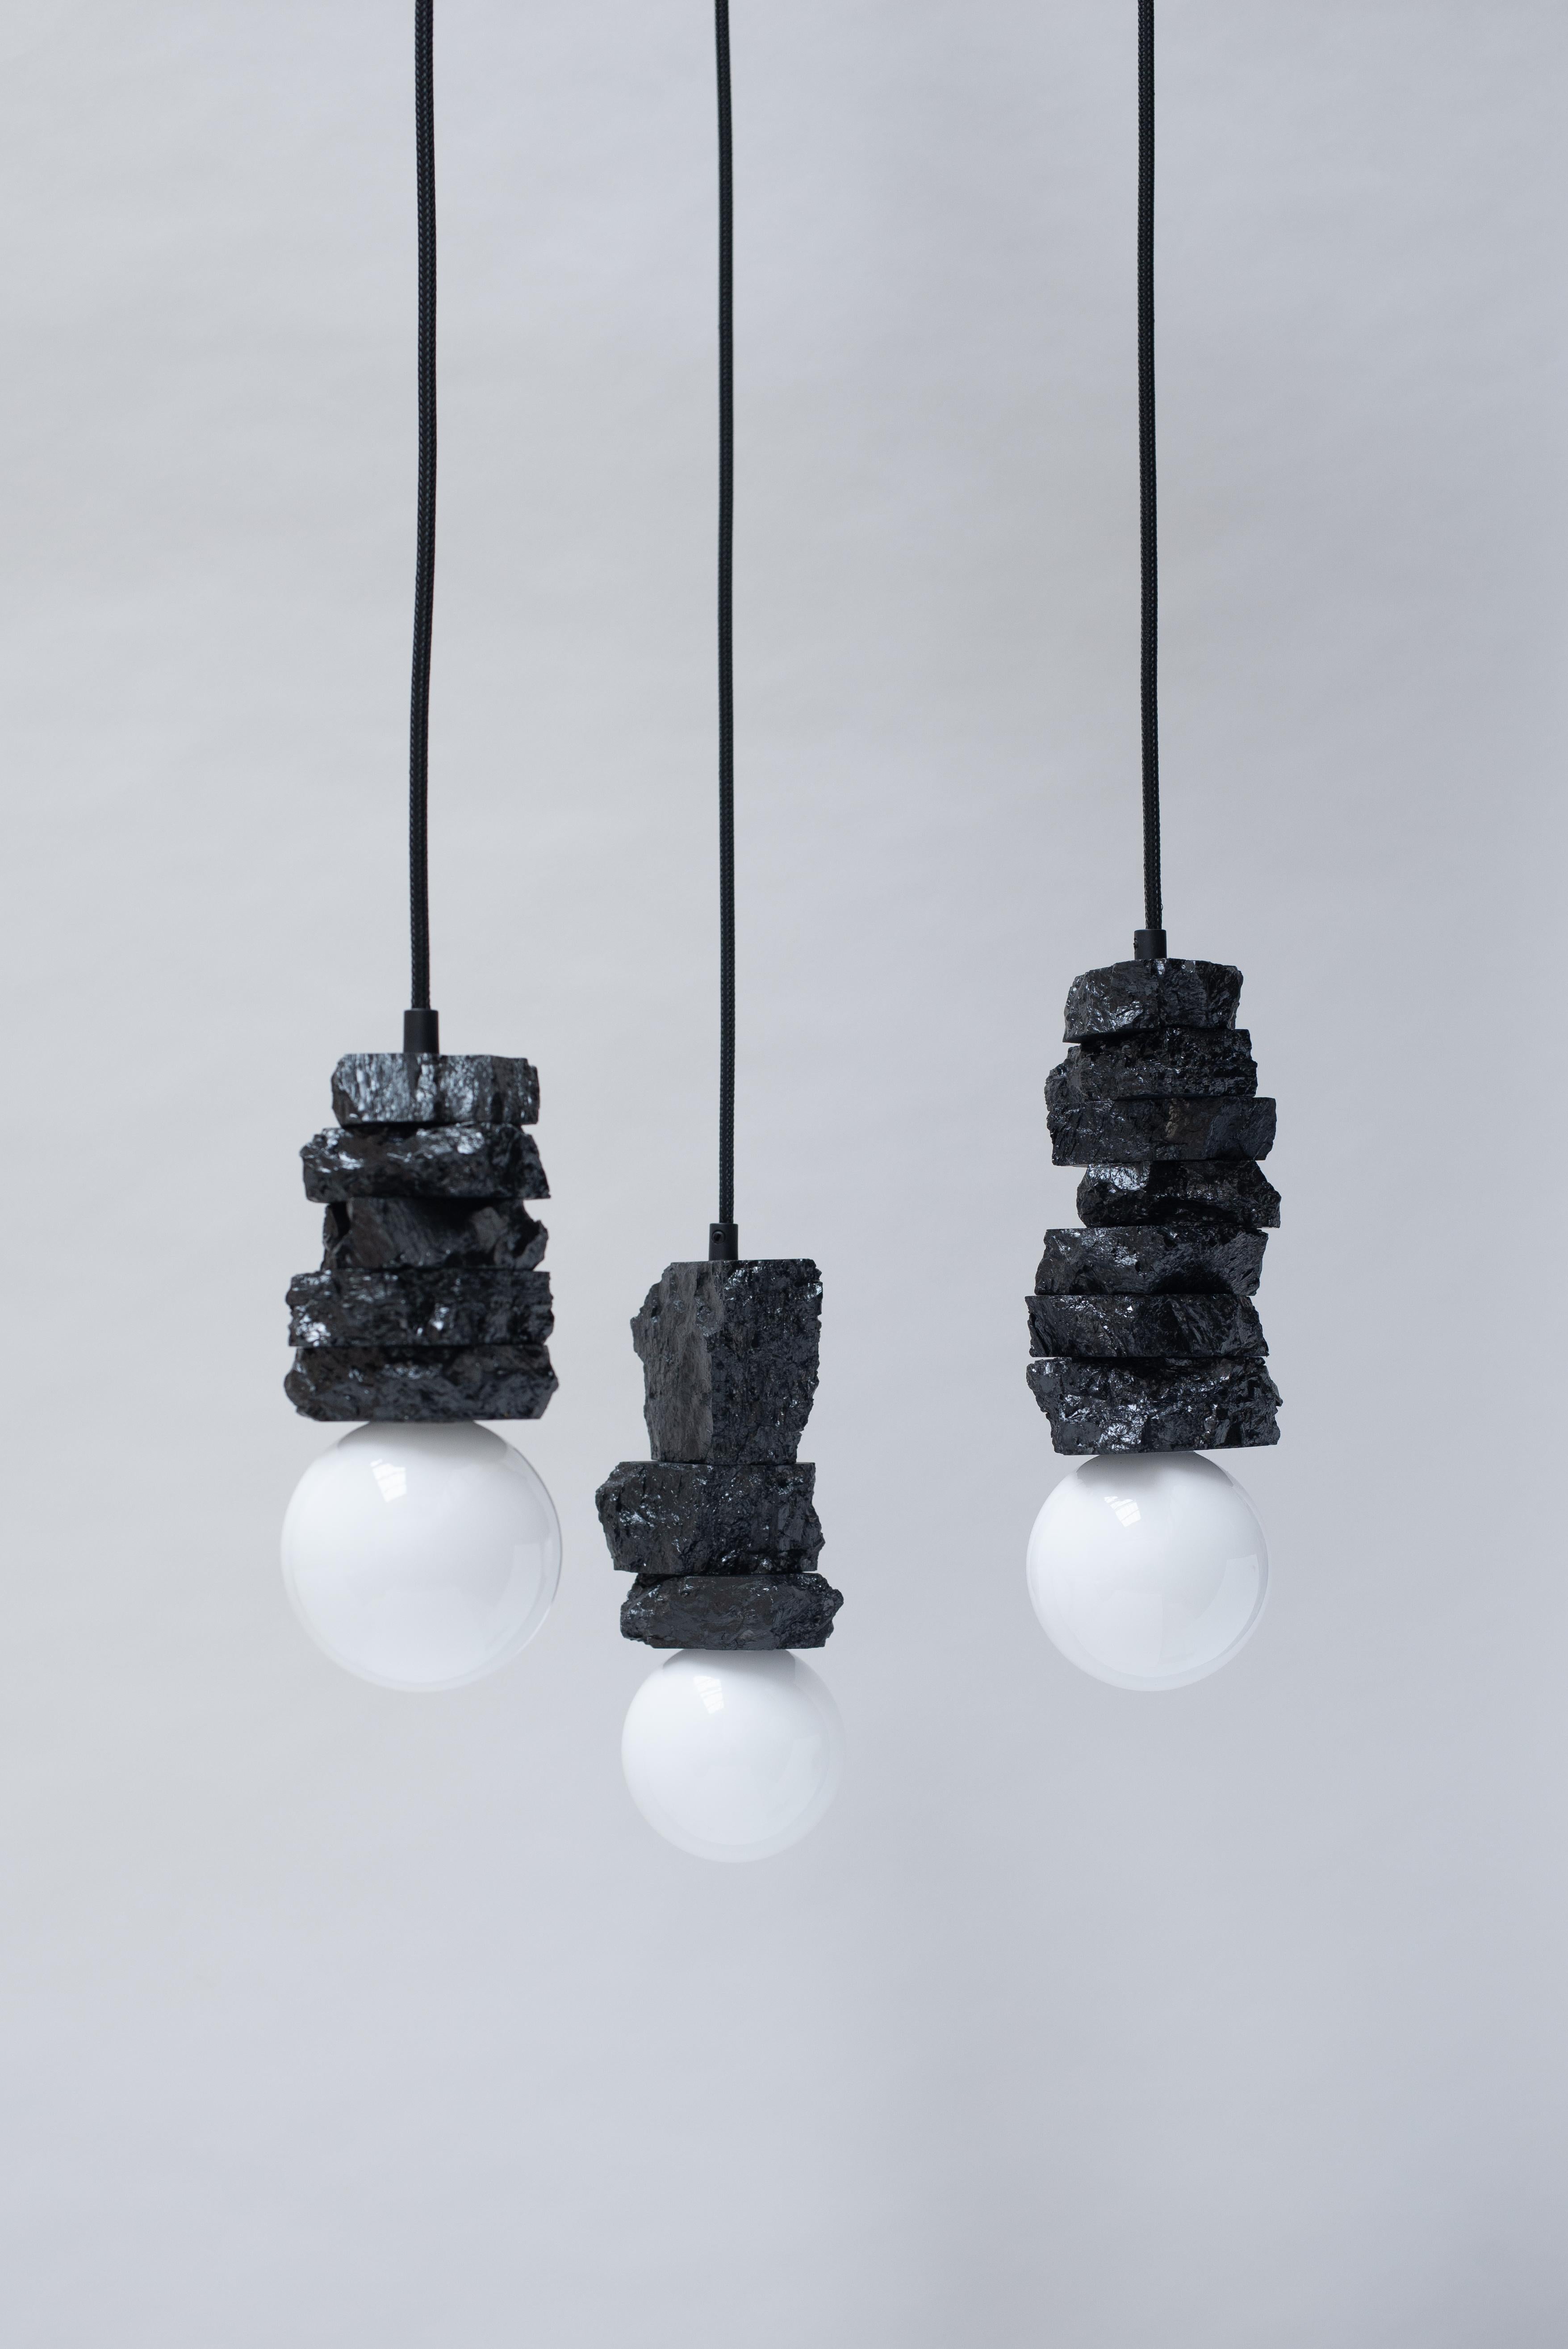 Set of 3 pendant lights 020 by Jesper Eriksson
Dimensions: D20 x H40 cm 
Materials: Anthracite coal, opal glass
Weight: 5 kg

All our lamps can be wired according to each country. If sold to the USA it will be wired for the USA for